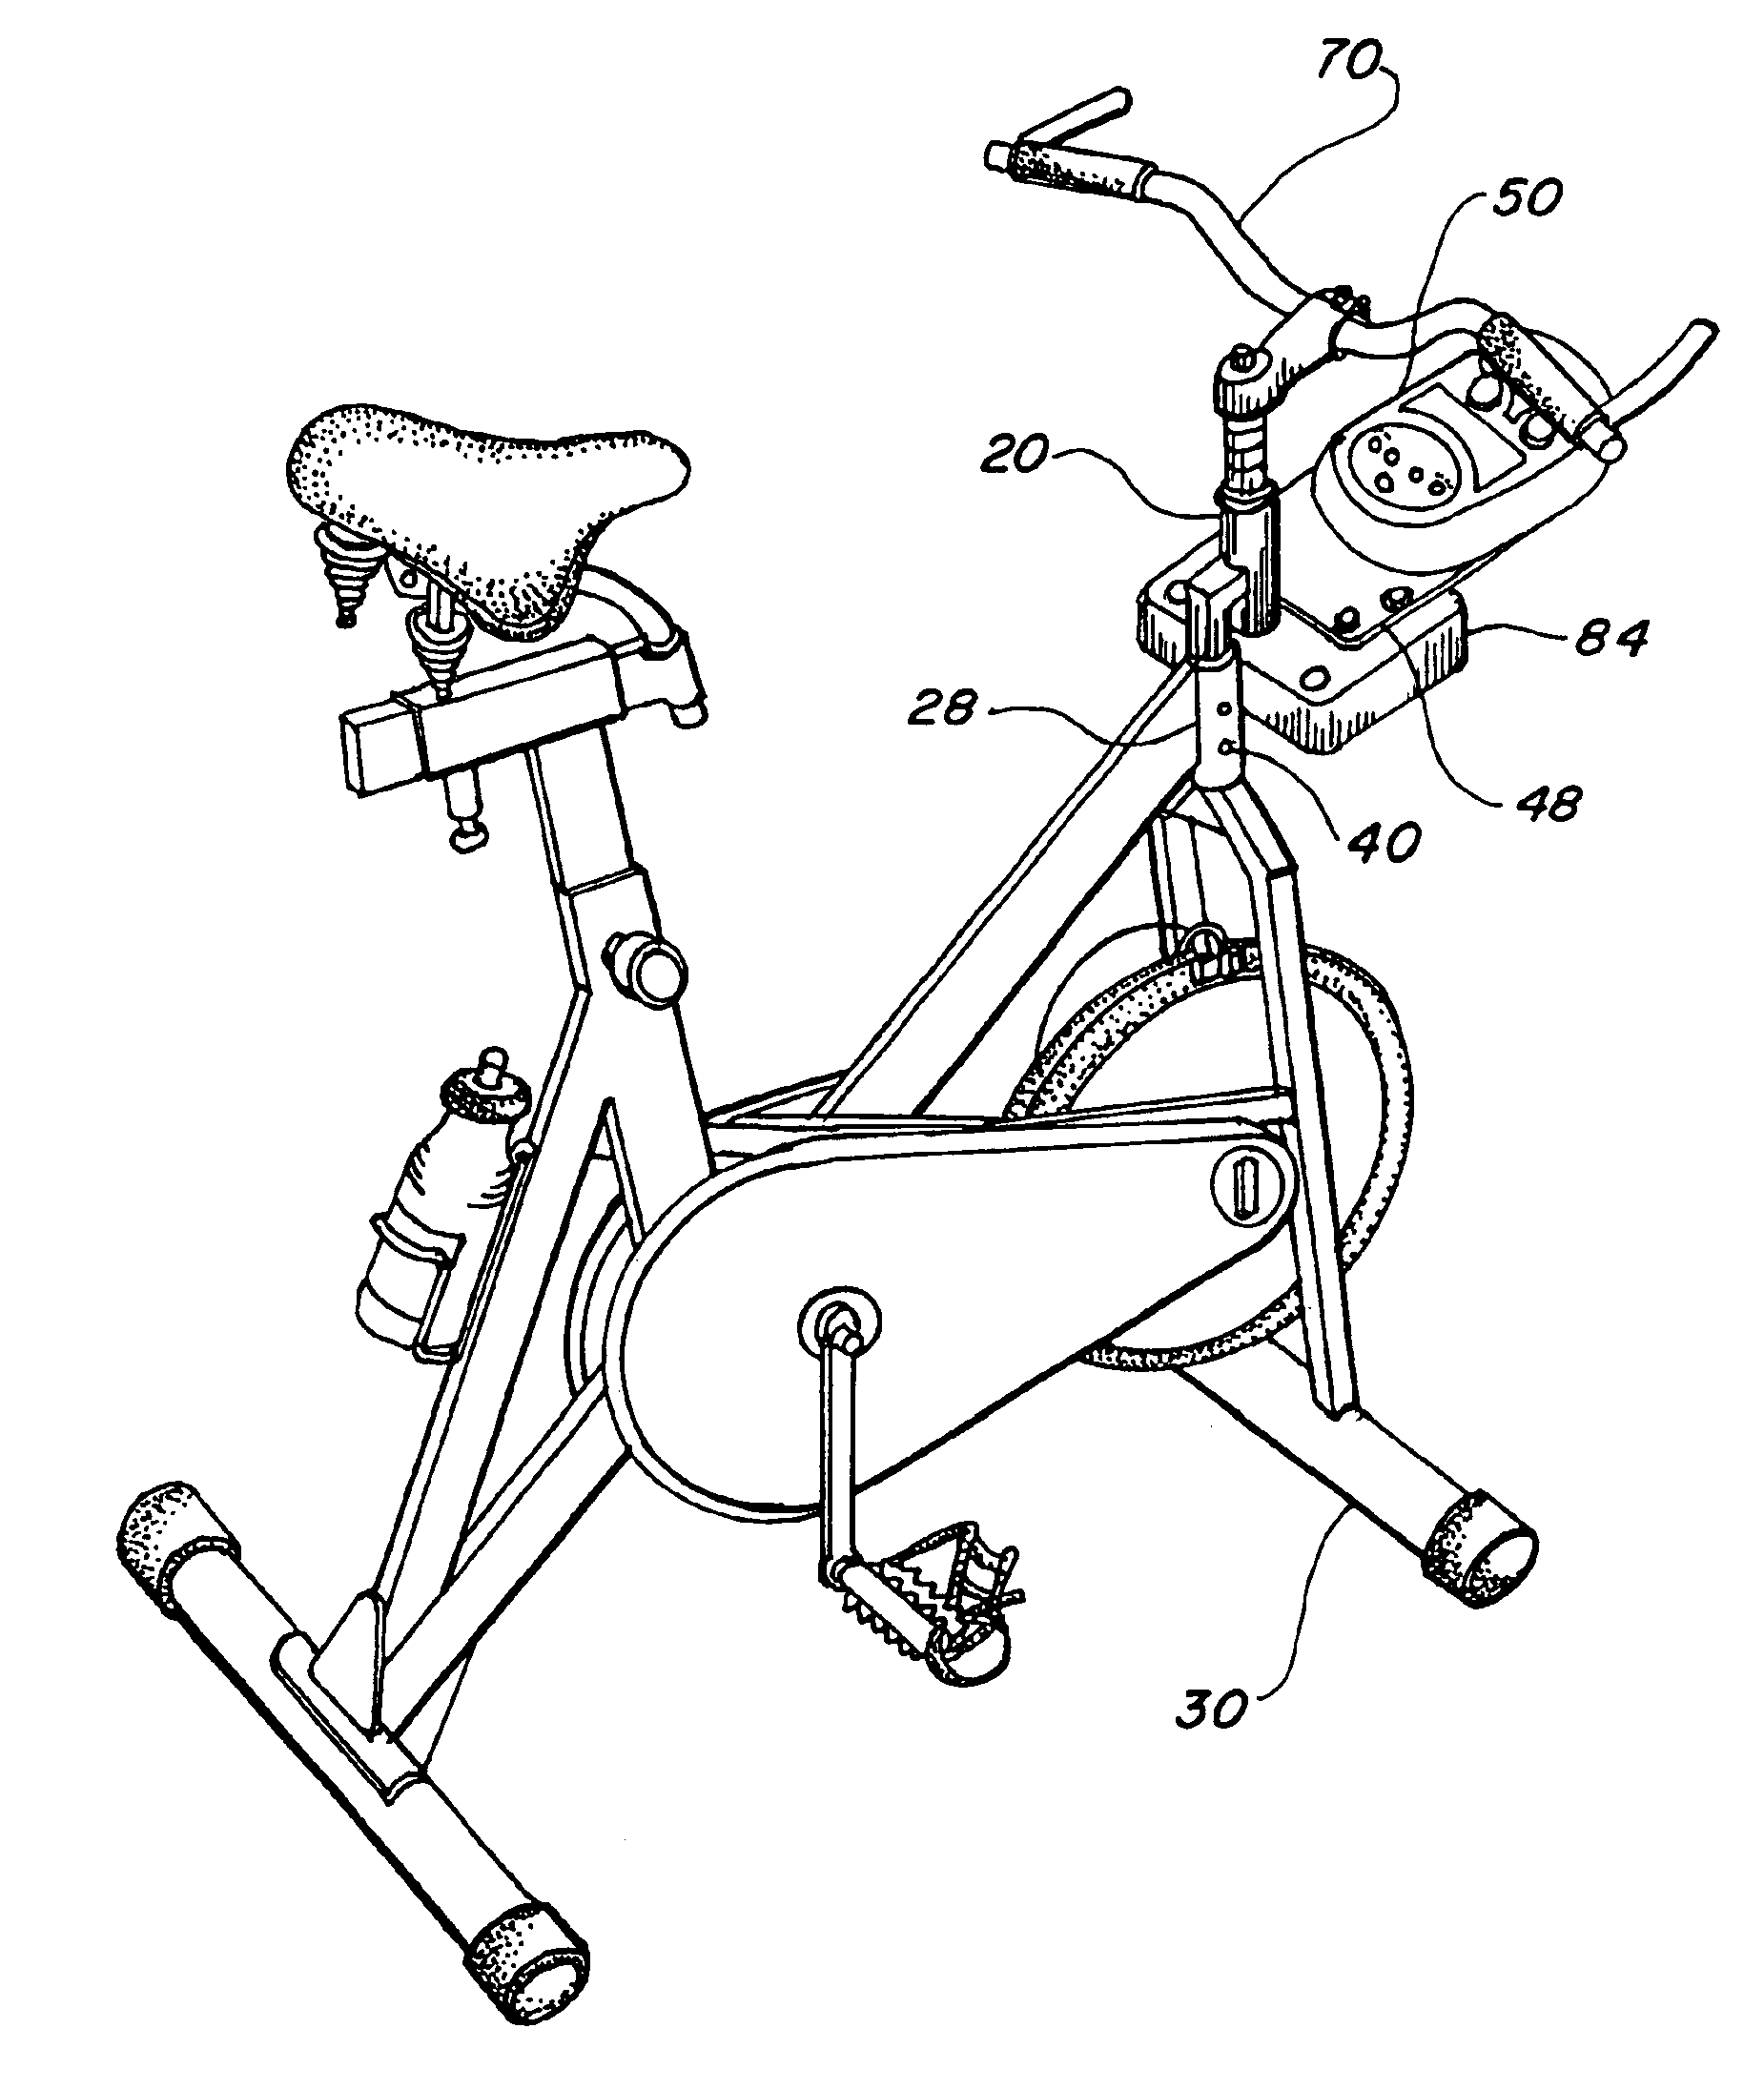 Exercise bicycle virtual reality steering apparatus